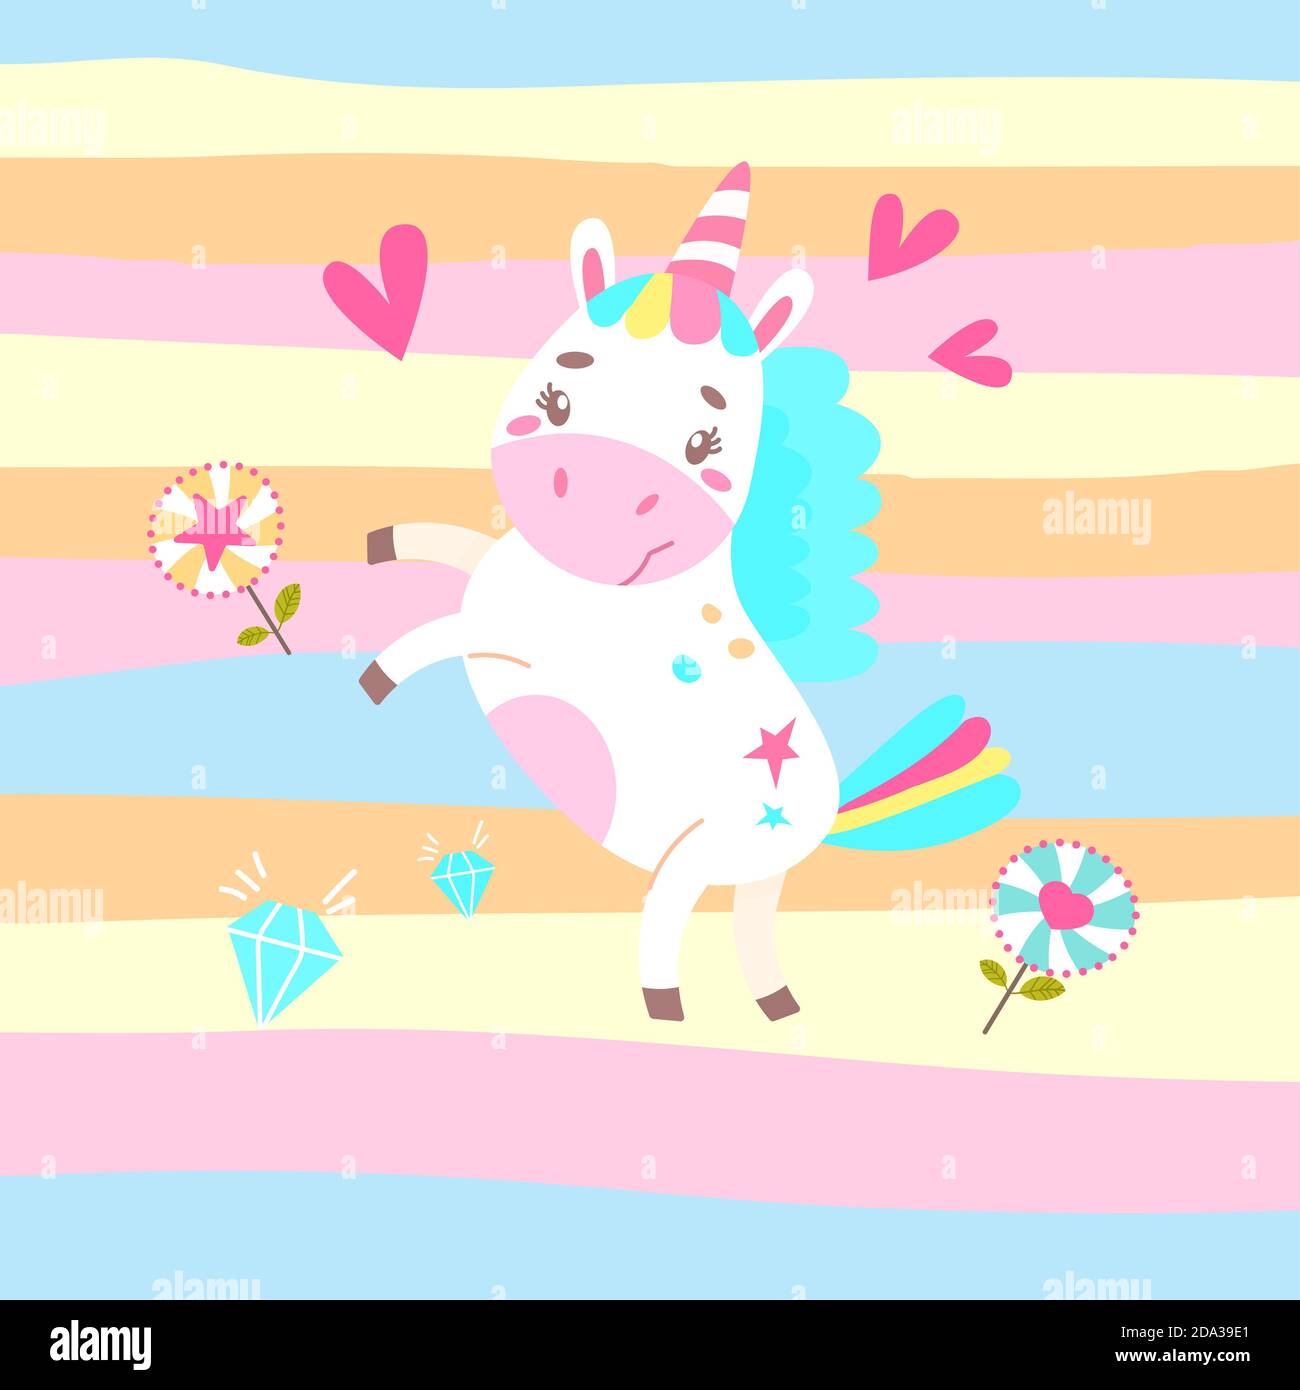 Rainbow unicorn surrounded by flowers. heart, brilliant. Simple illustration on a striped background. Can be used as a design for office supplies, pri Stock Photo